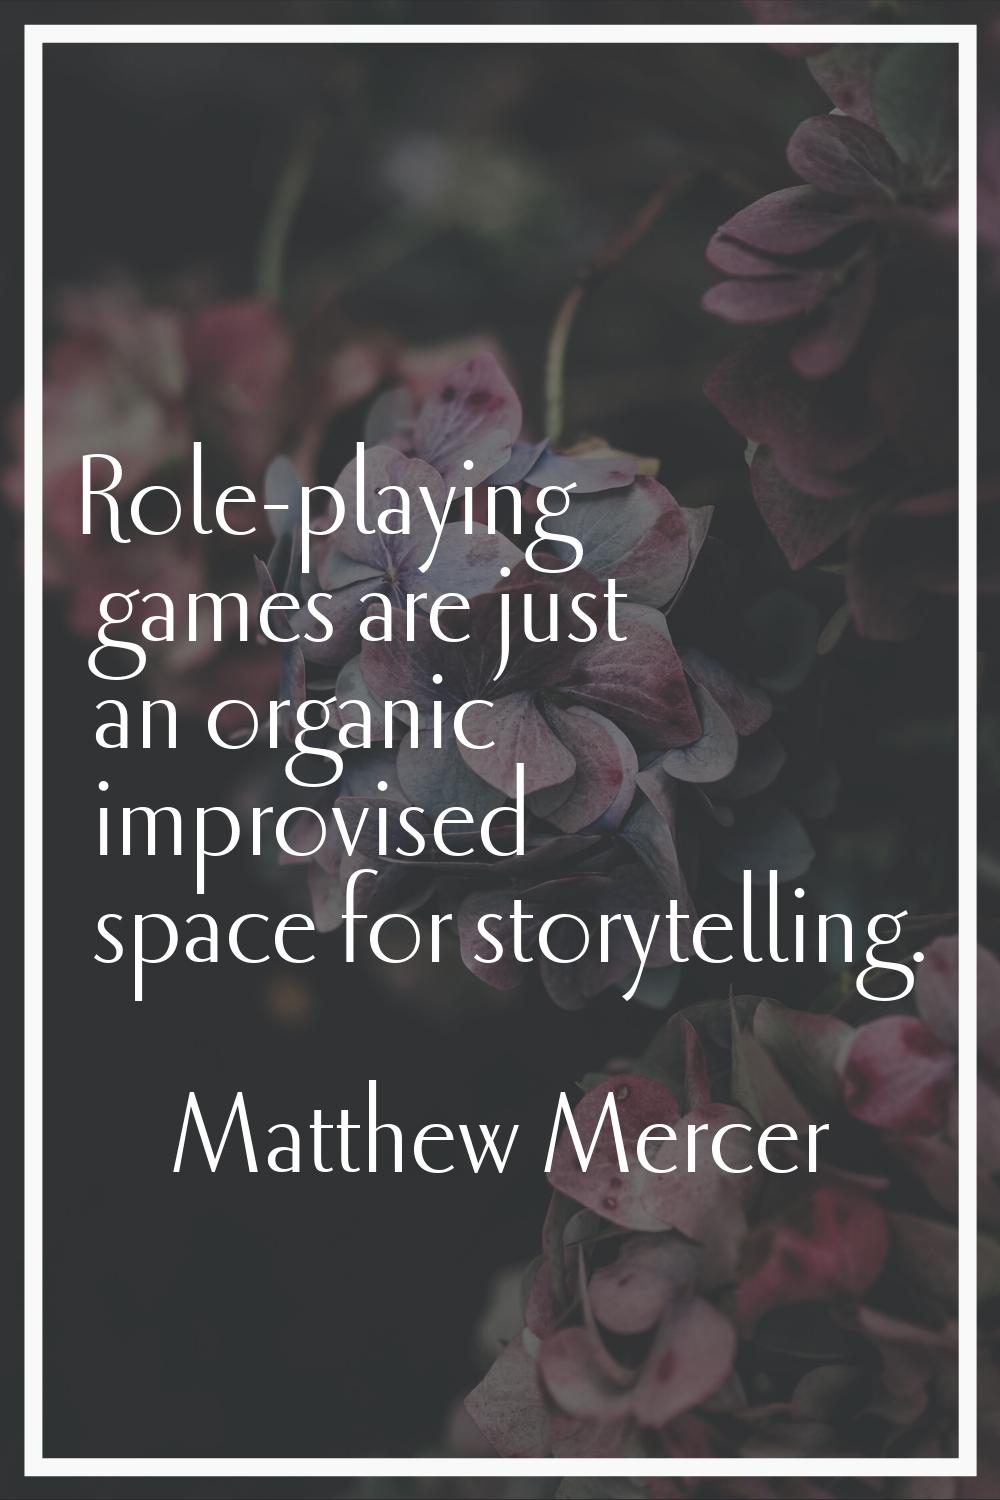 Role-playing games are just an organic improvised space for storytelling.